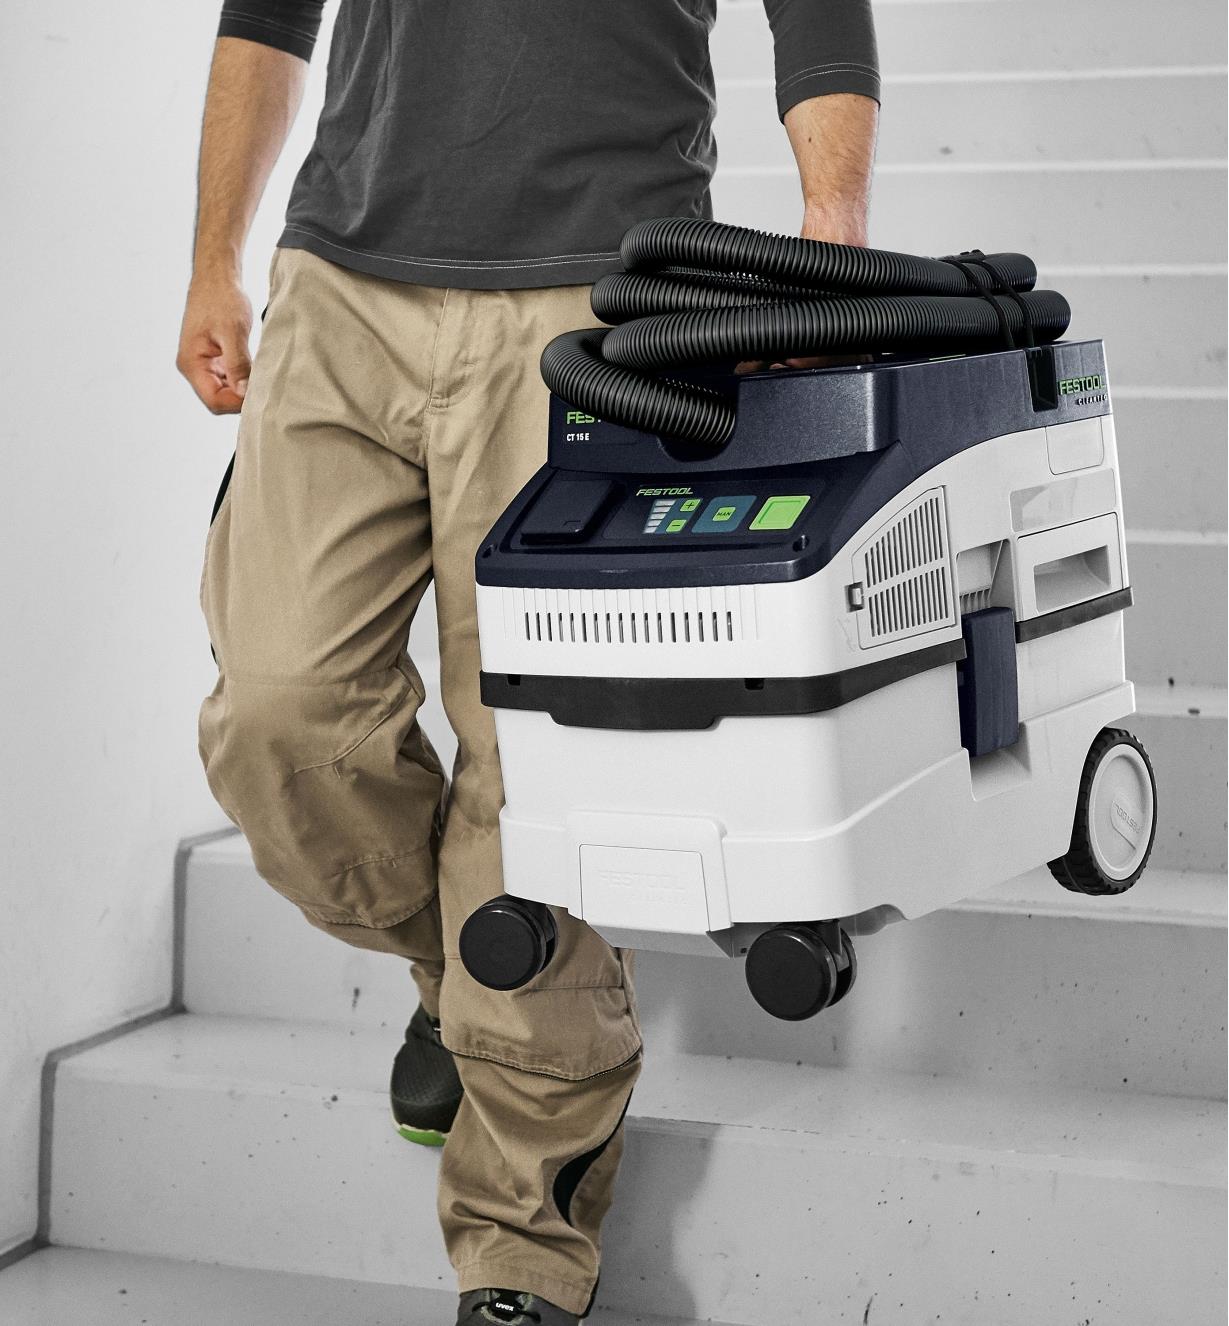 Festool CT 15 E Mobile Dust Extractor being carried downstairs